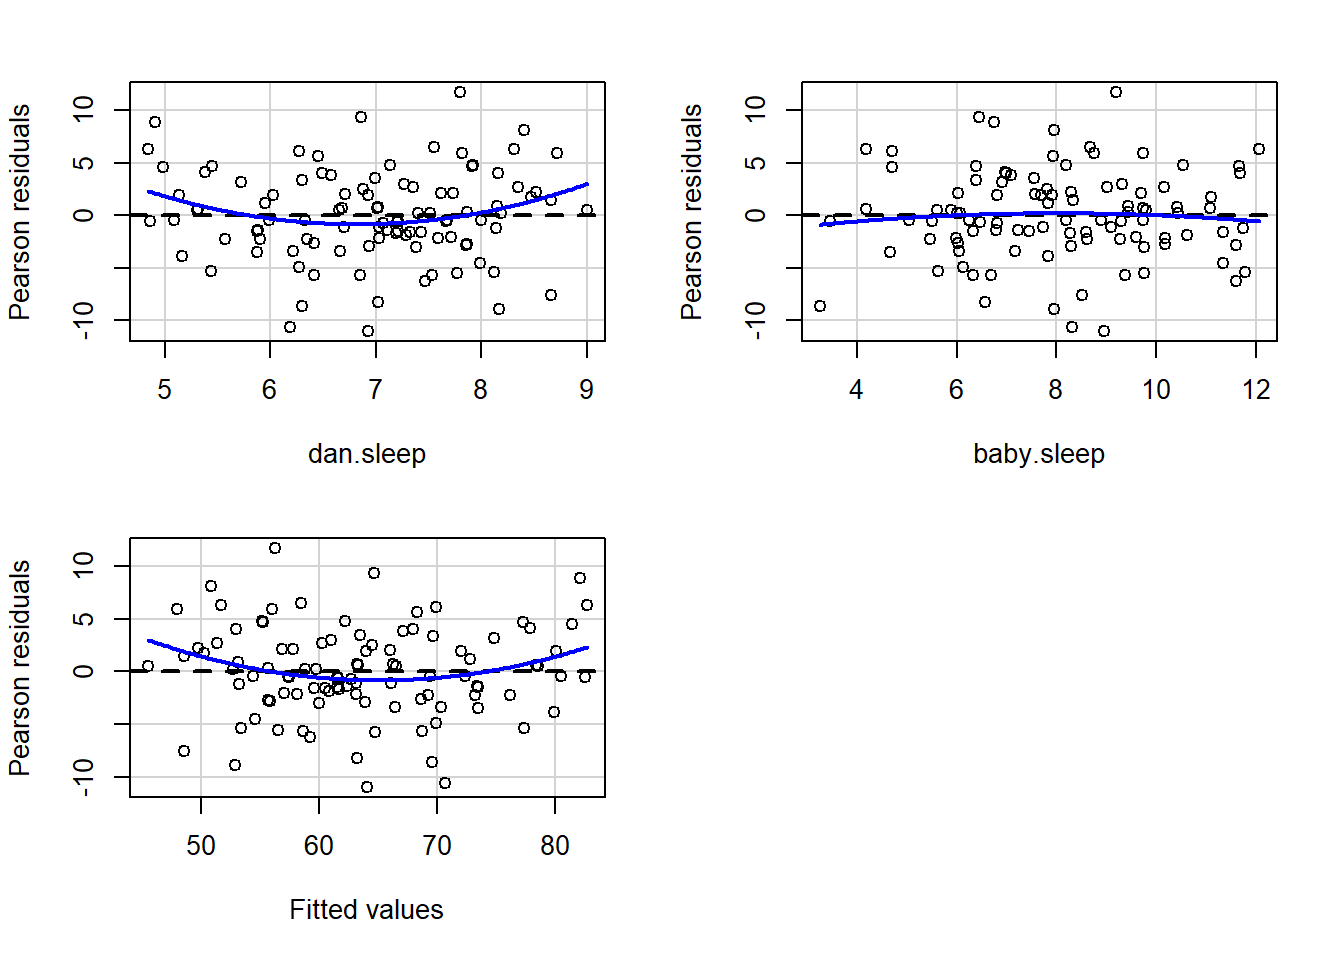 Plot of the fitted values against the residuals for `regression.2`, along with similar plots for the two predictors individually. This plot is produced by the `residualPlots()` function in the `car` package. Note that it refers to the residuals as "Pearson residuals", but in this context these are the same as ordinary residuals.